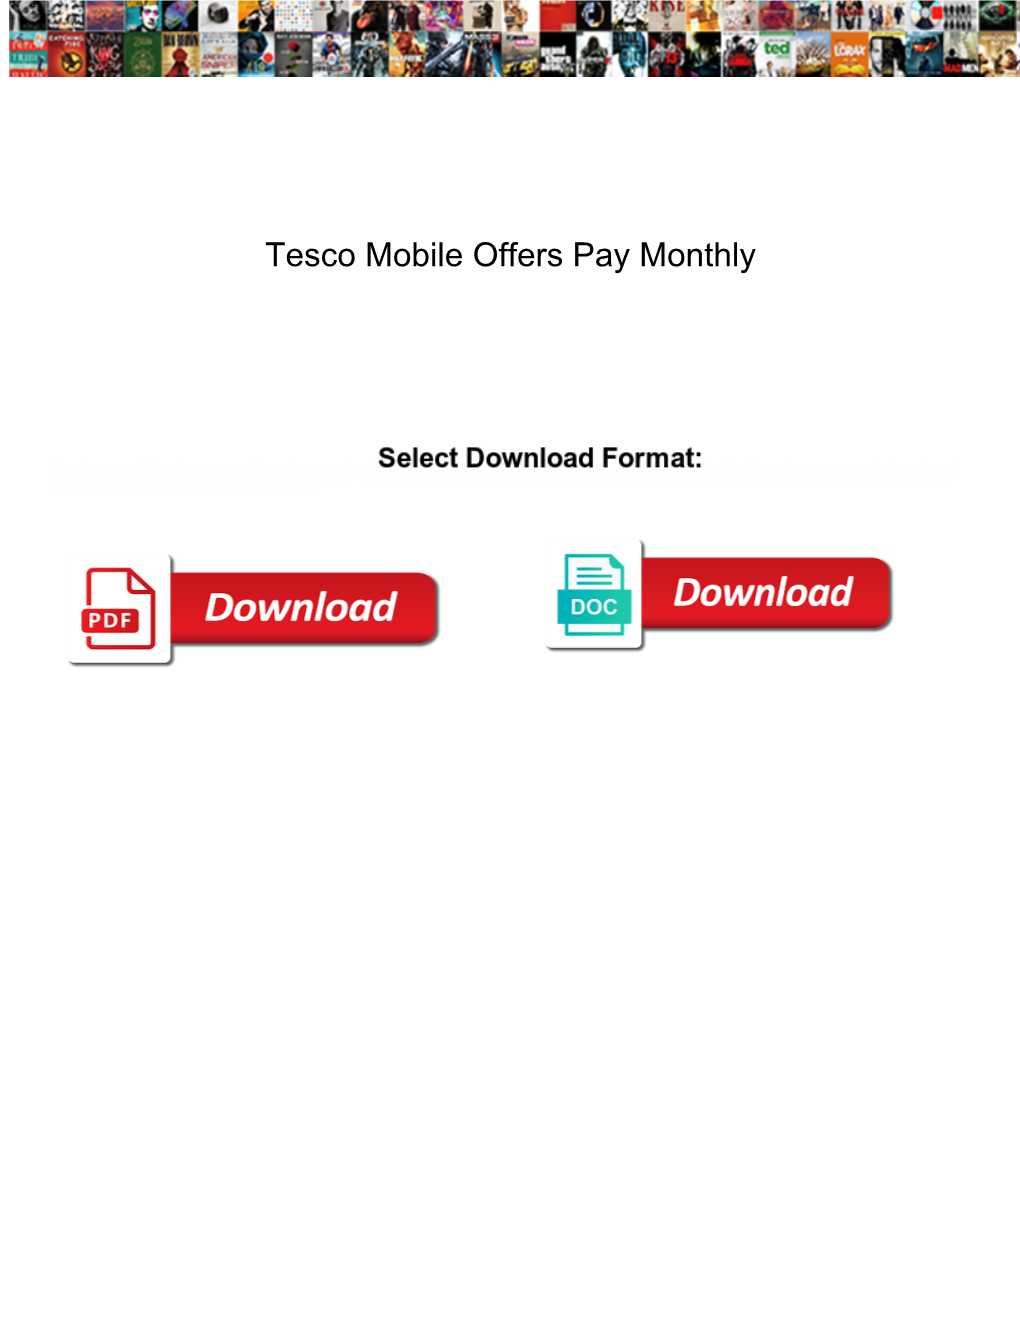 Tesco Mobile Offers Pay Monthly